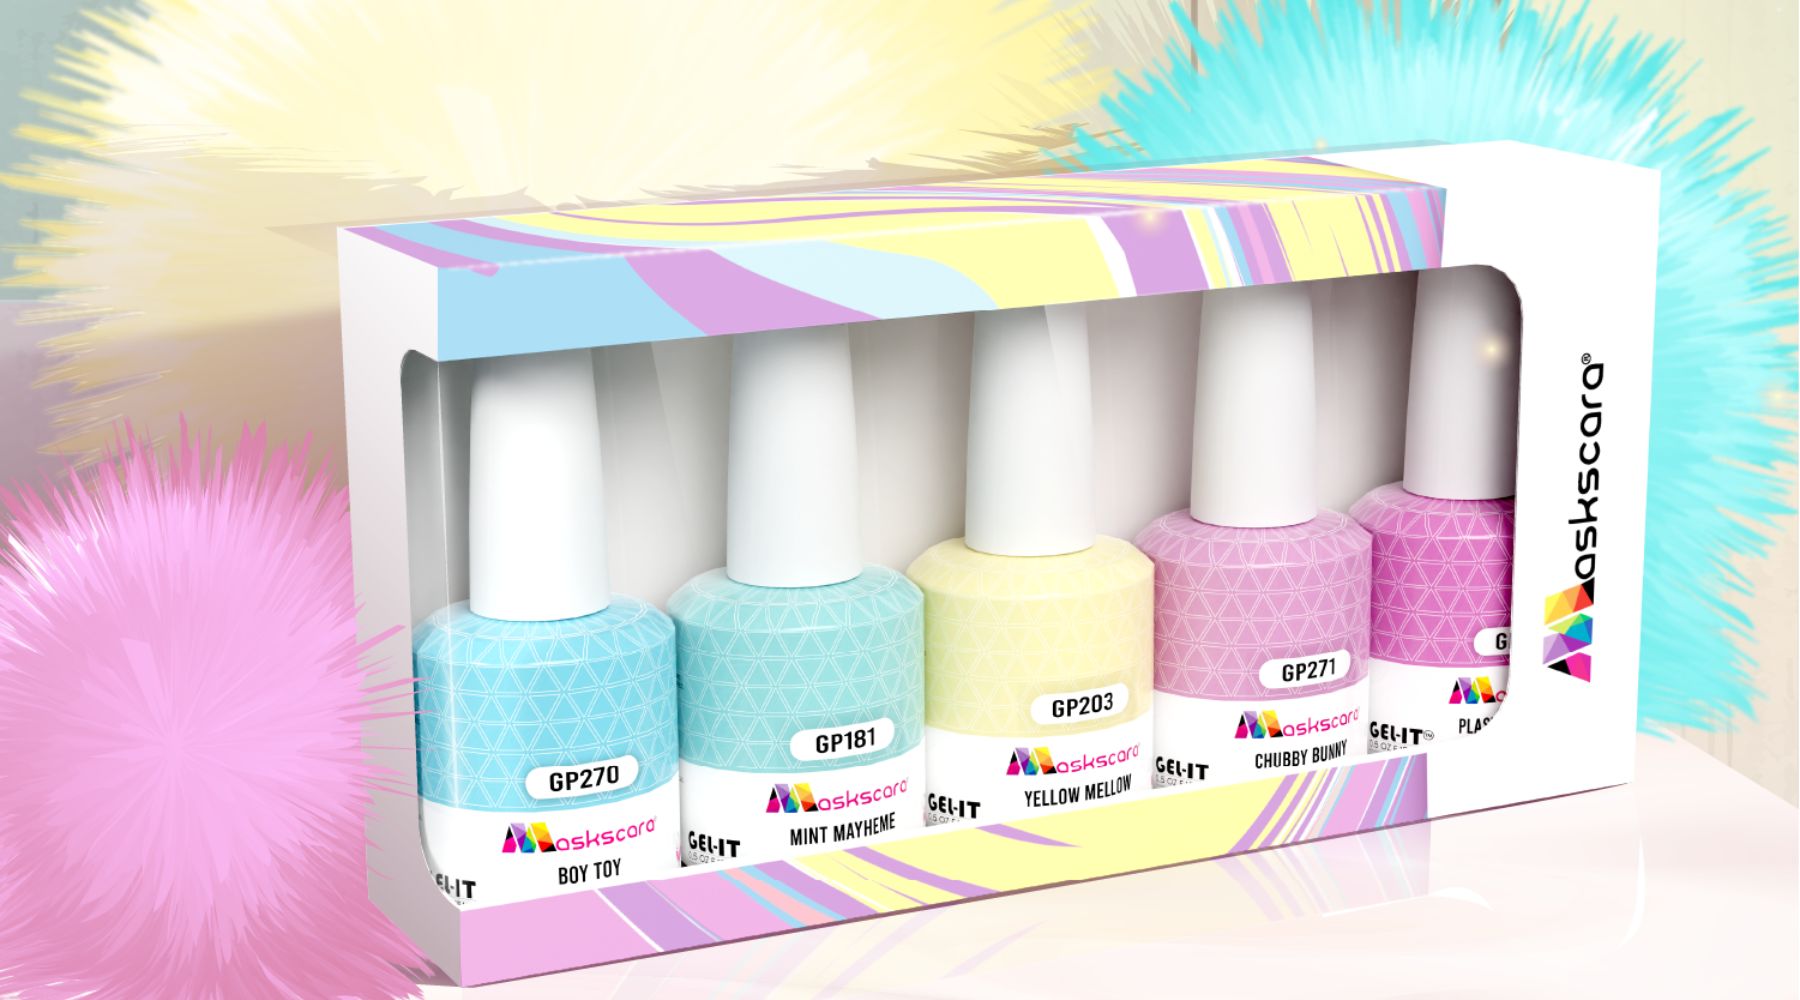 The Ultimate Pastel Gel Polish Collection for your Salon - Maskscara